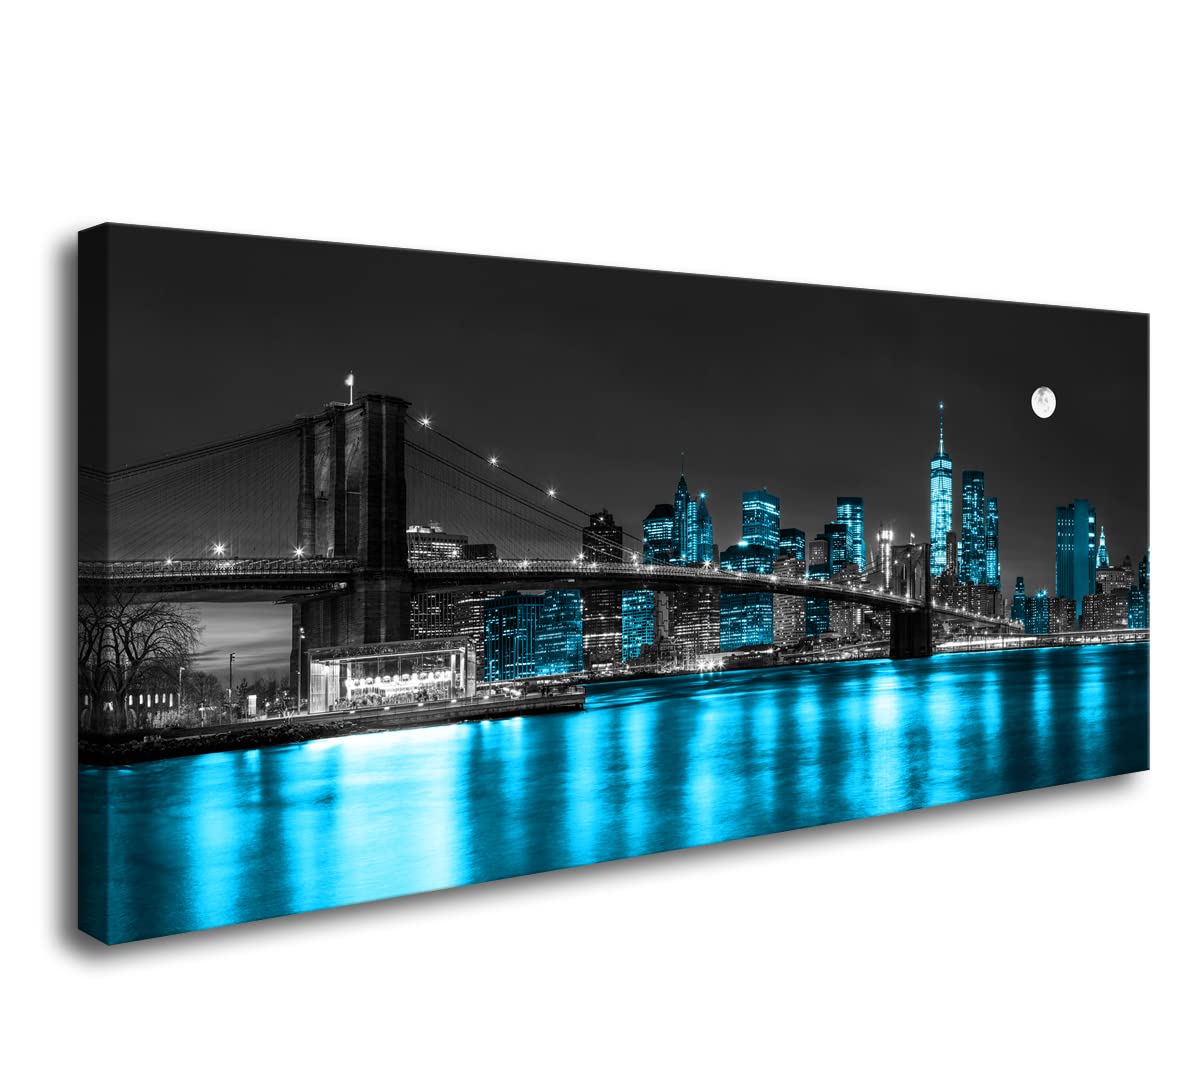 Aibonnly Wall Art Canvas Painting Black White and Blue New York Brooklyn Bridge 1 Piece Cityscape Night Building Skyline Picture Poster Print Framed for Living Room Bedroom Kitchen Office Home Decor